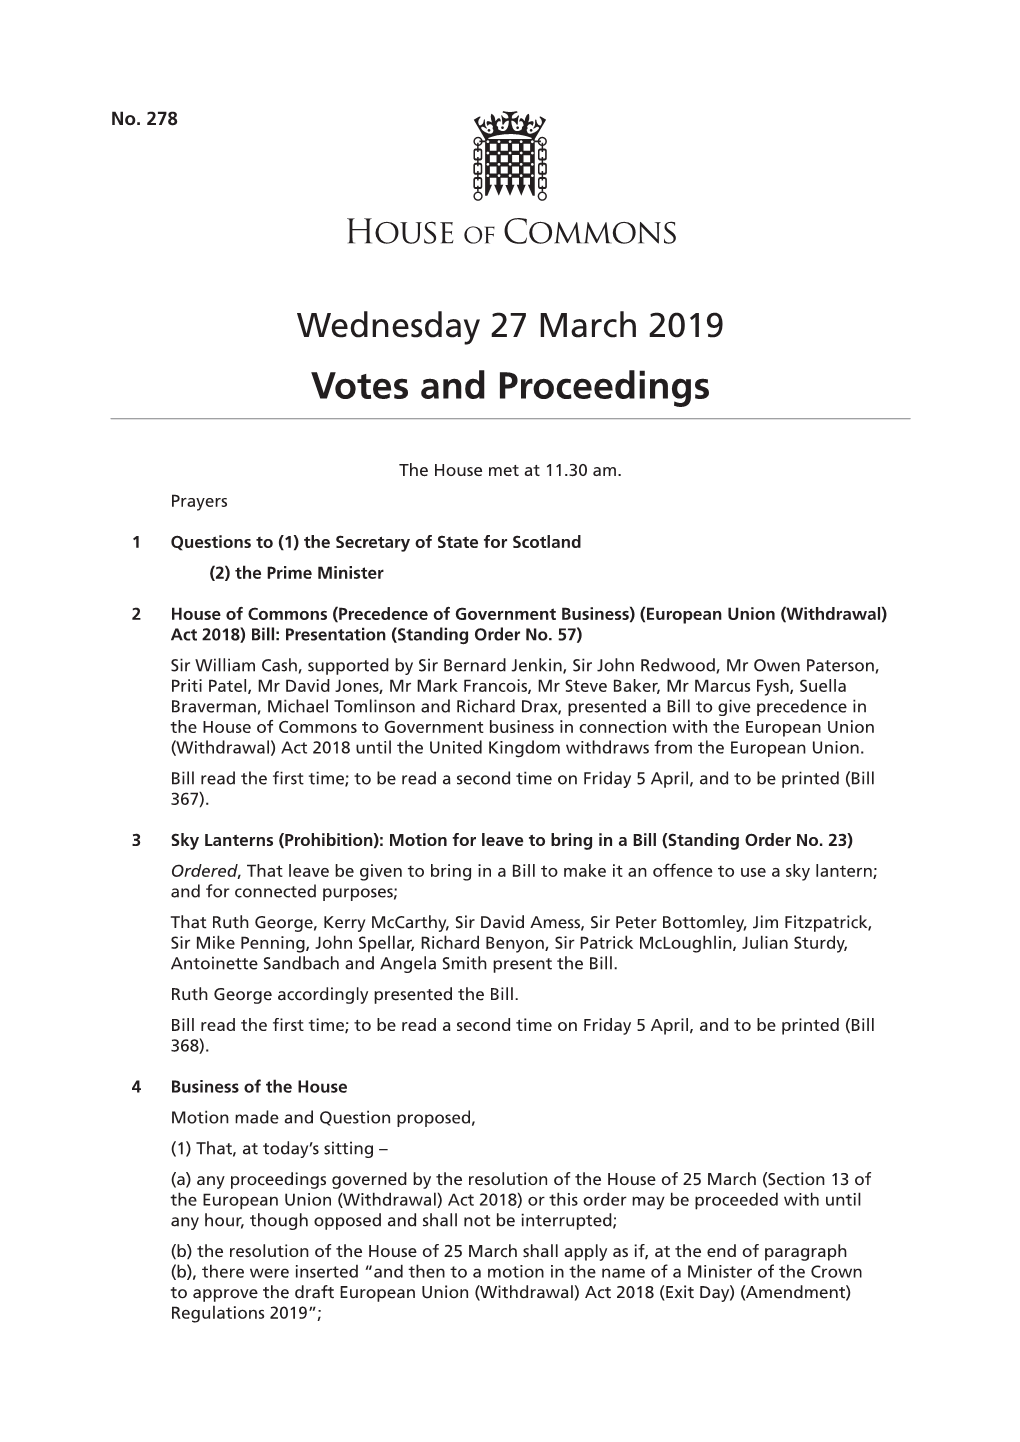 Wednesday 27 March 2019 Votes and Proceedings